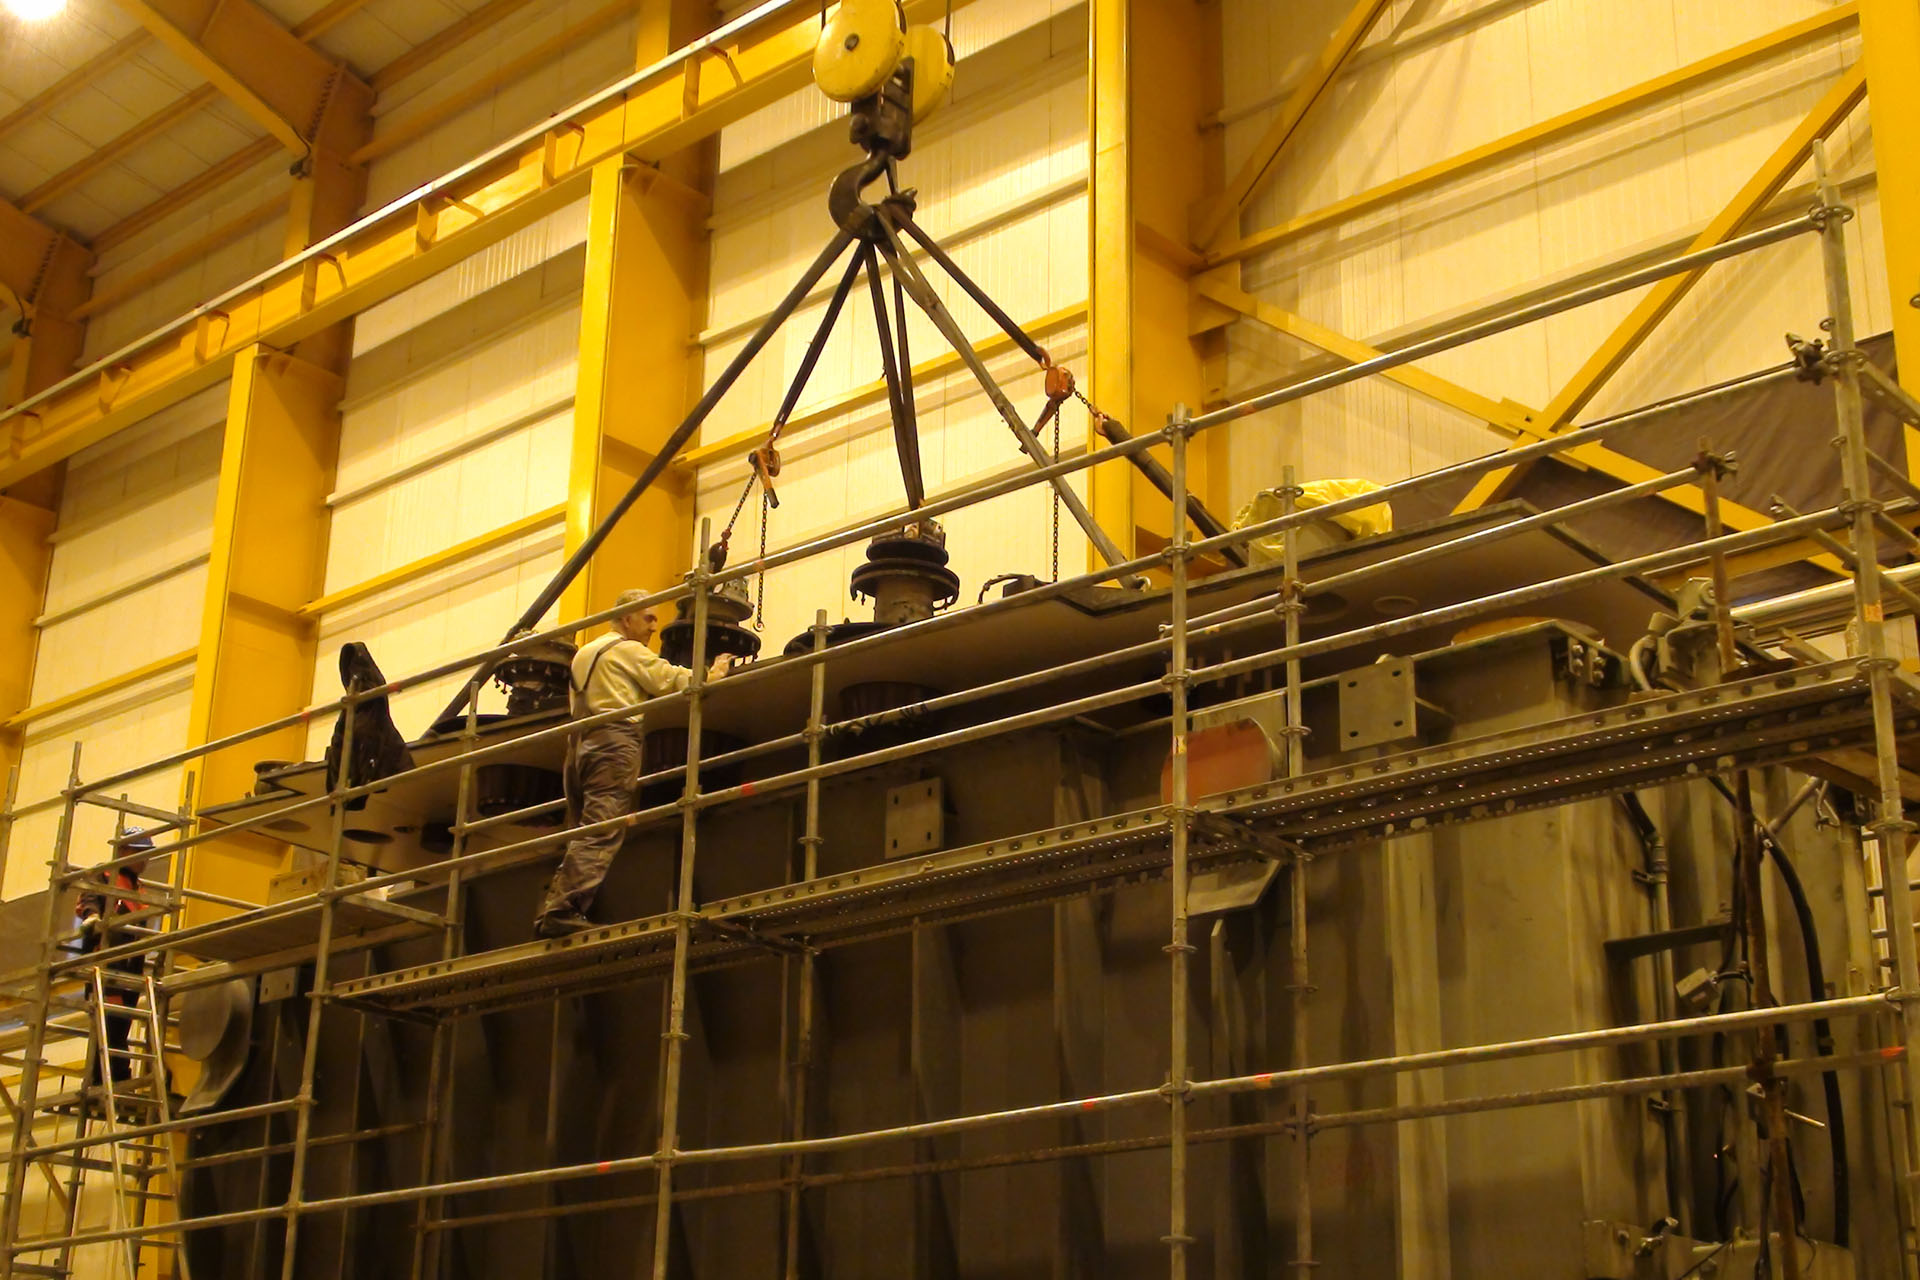 The main Transformer Unit 11 of the Rudshur Power Plant was launched